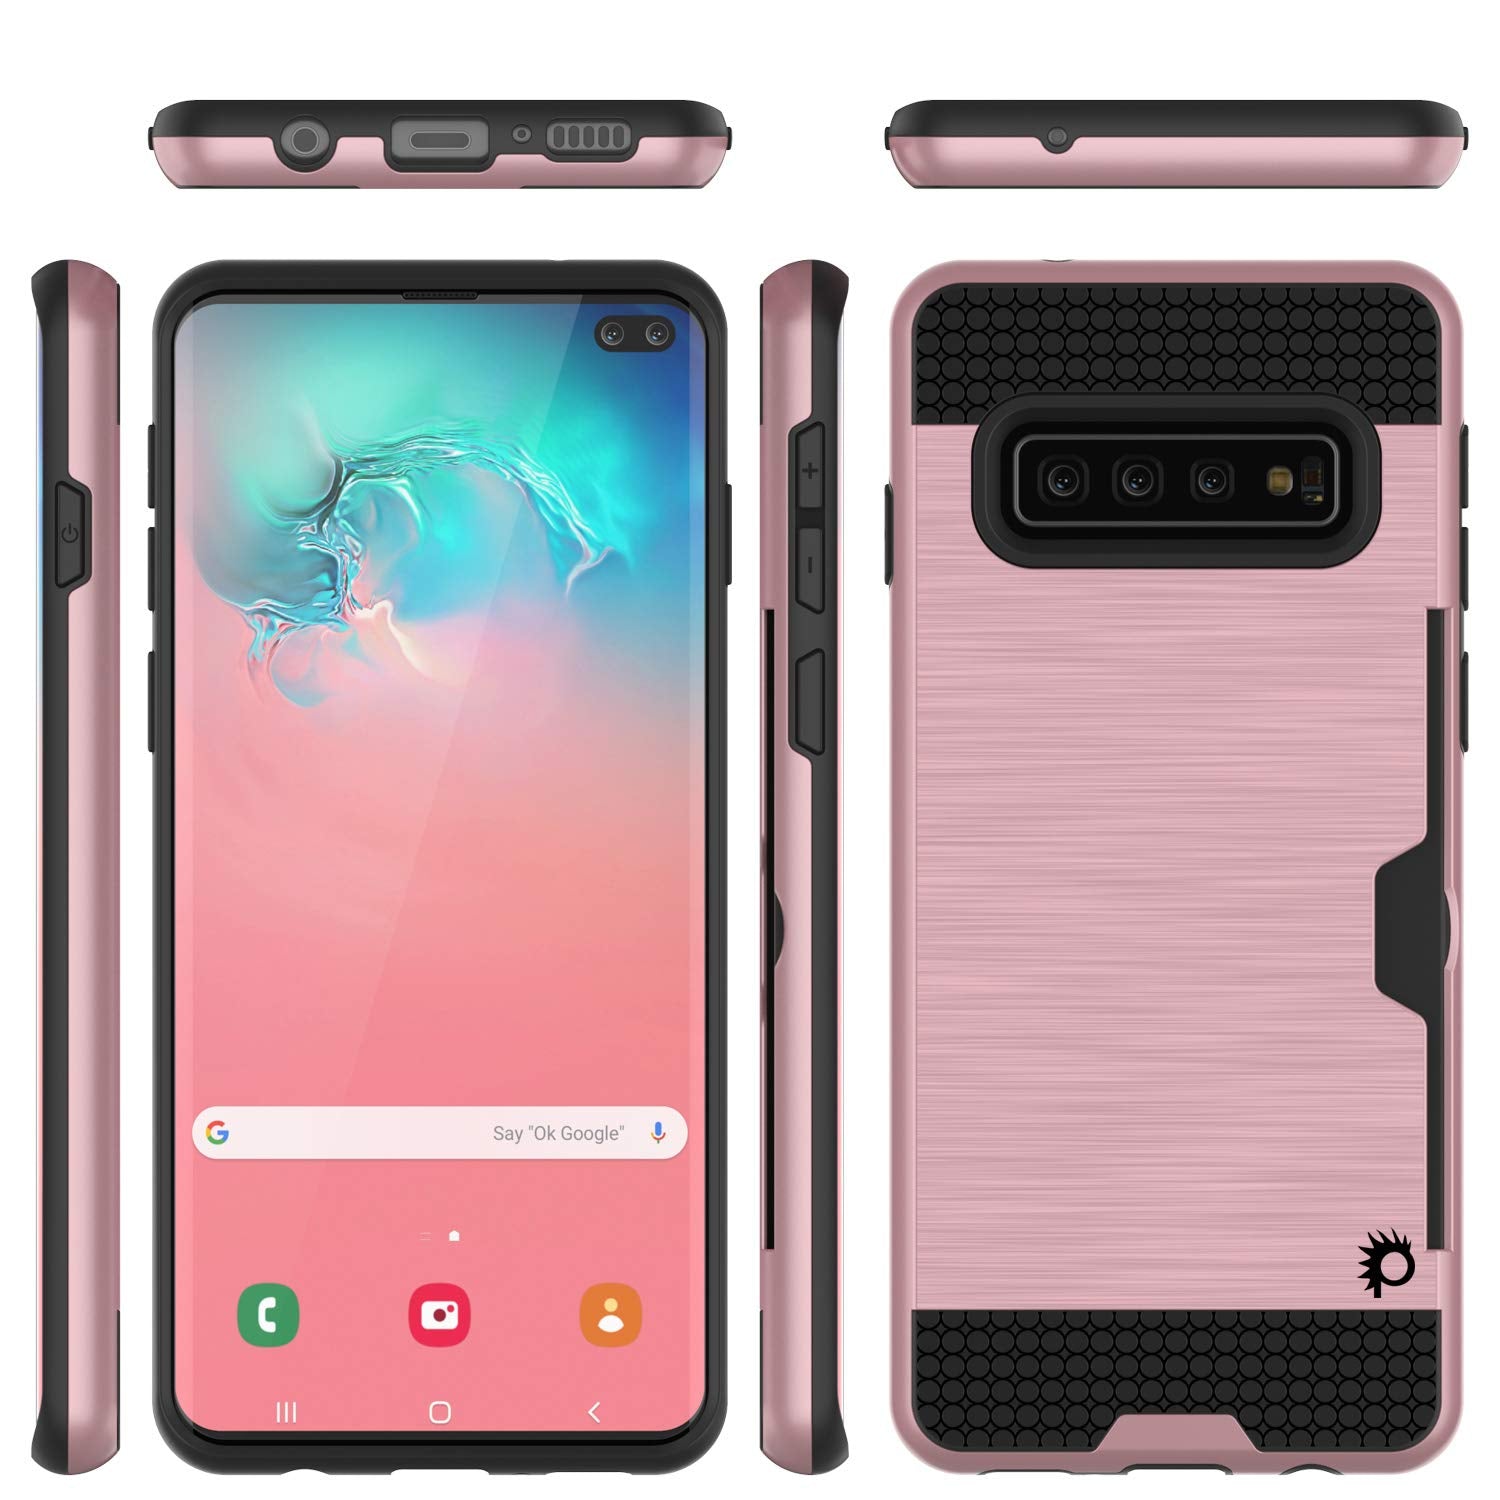 Galaxy S10+ Plus  Case, PUNKcase [SLOT Series] [Slim Fit] Dual-Layer Armor Cover w/Integrated Anti-Shock System, Credit Card Slot [Rose Gold]